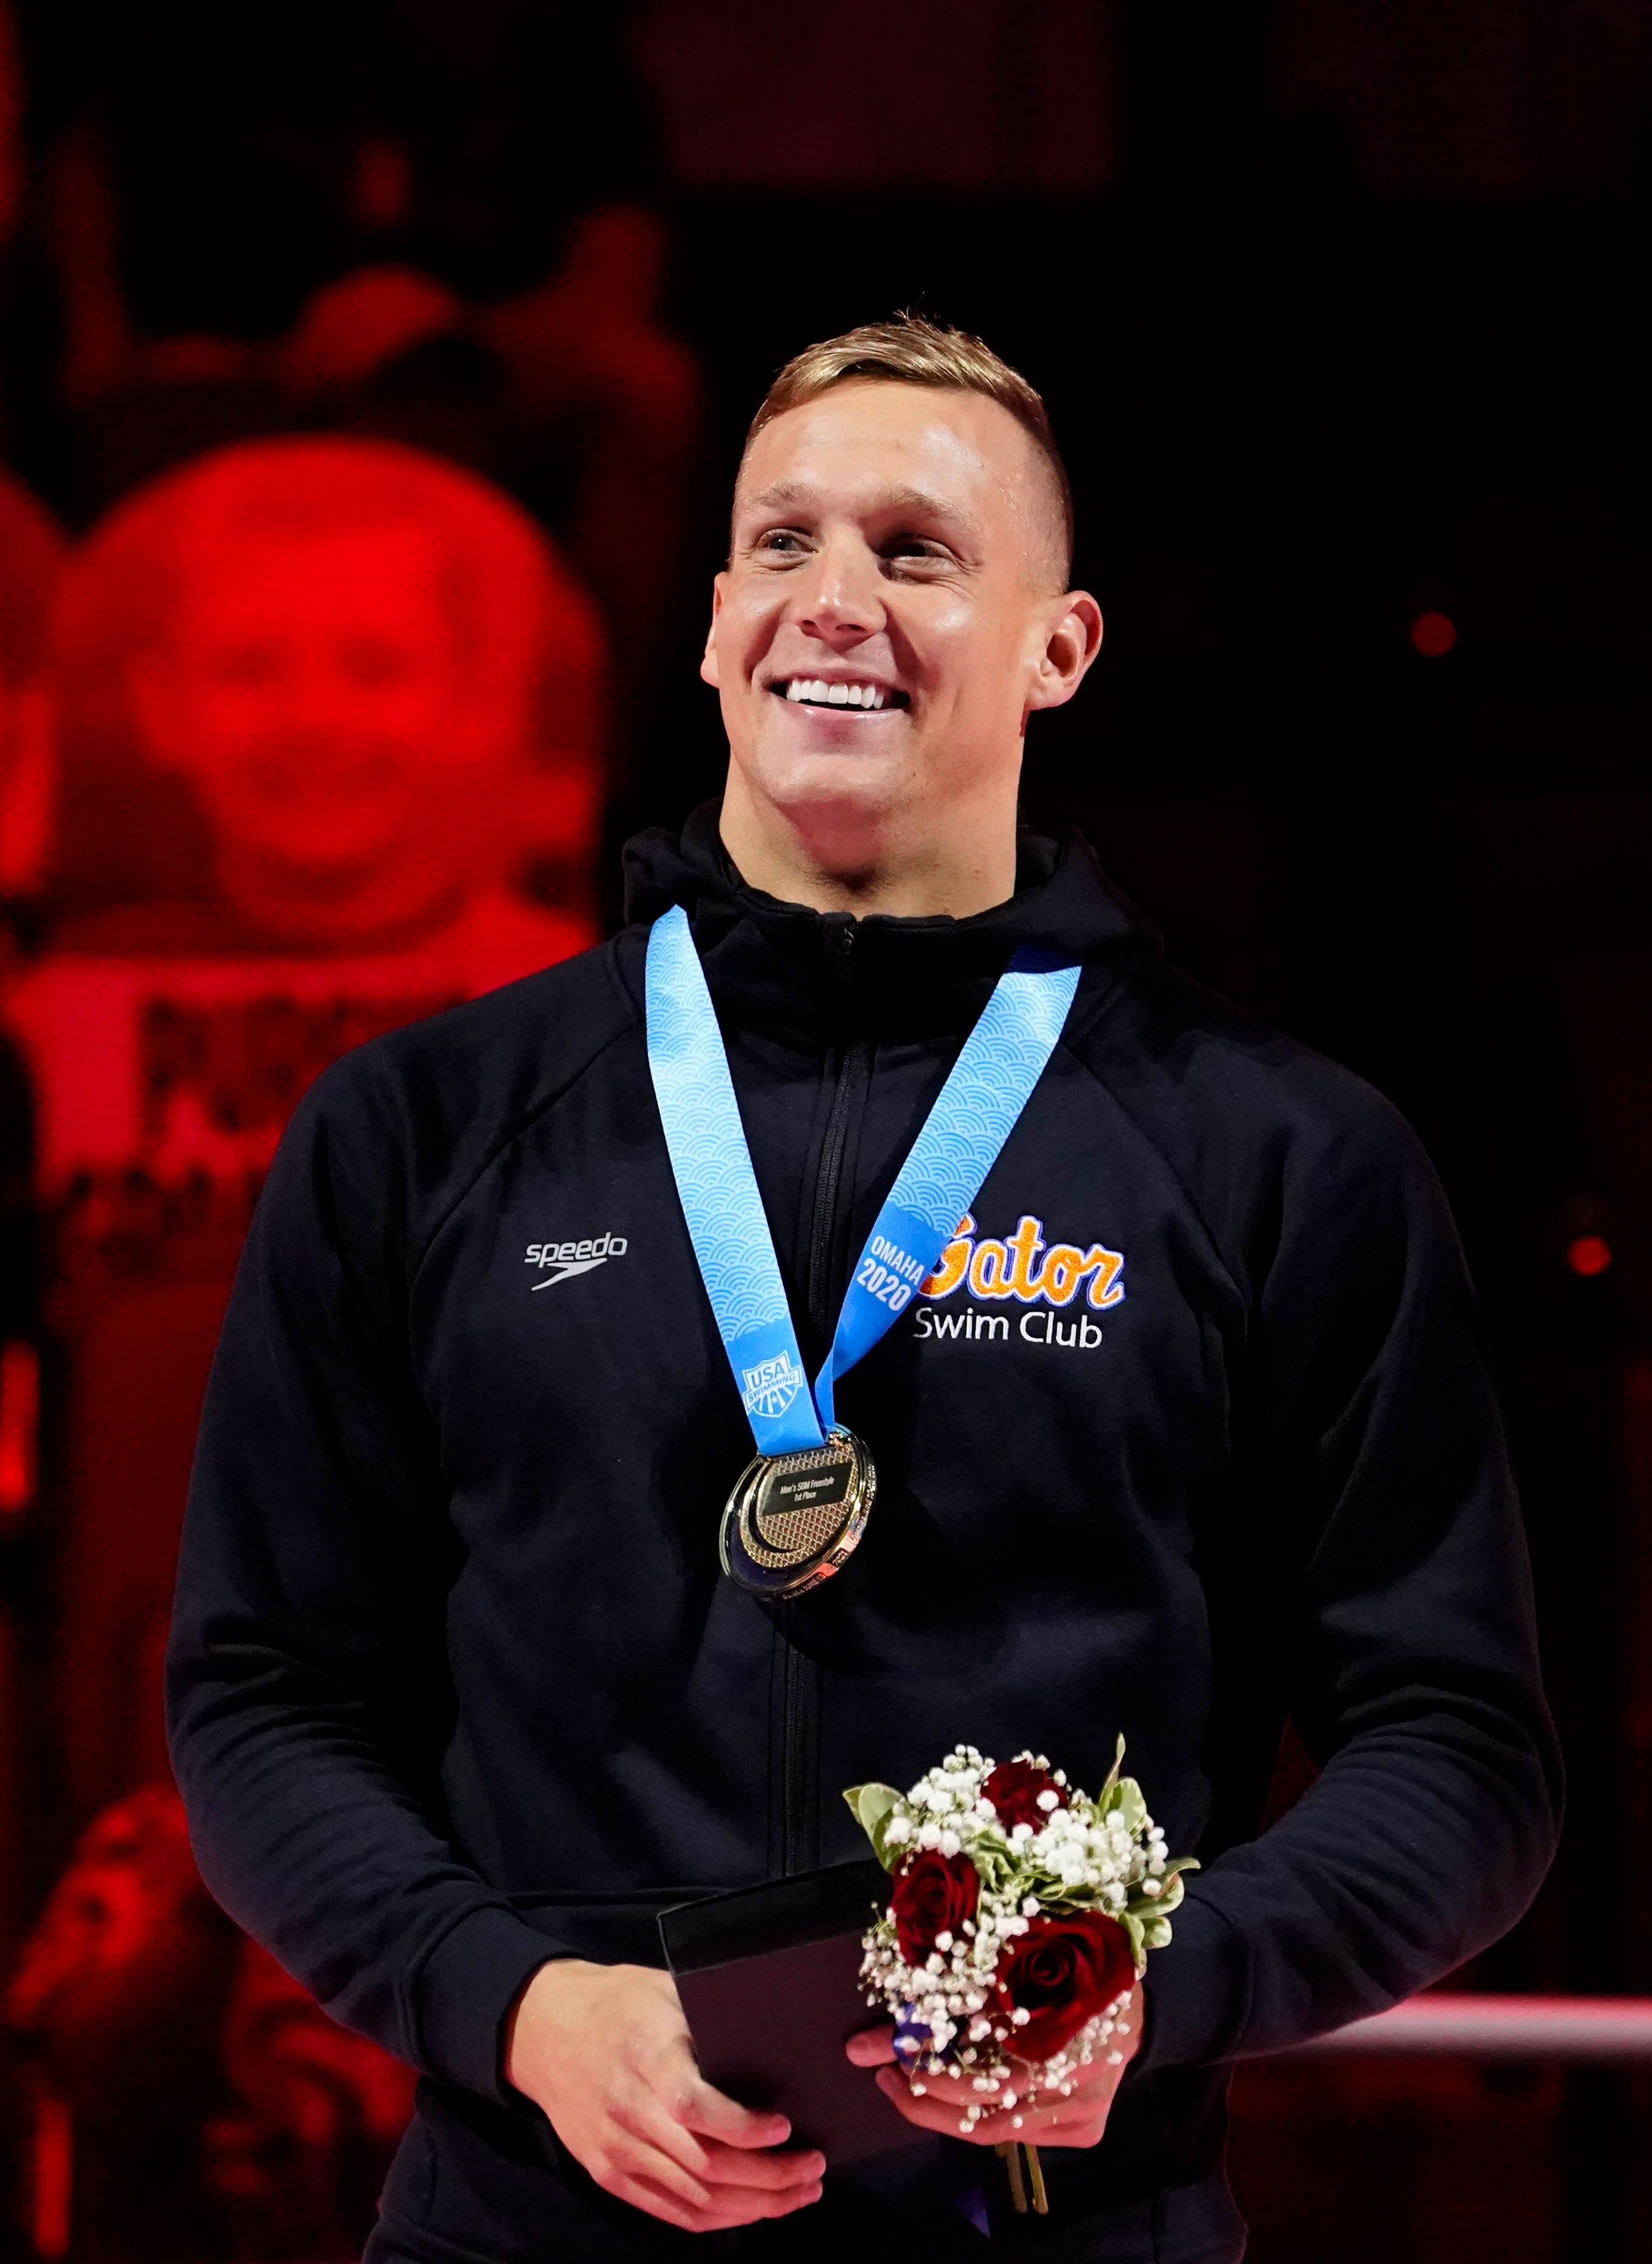 Caeleb Dressel celebrates after winning the men's 50m freestyle final during the U.S. Olympic Team Trials Swimming competition at CHI Health Center Omaha on June 20, 2021.